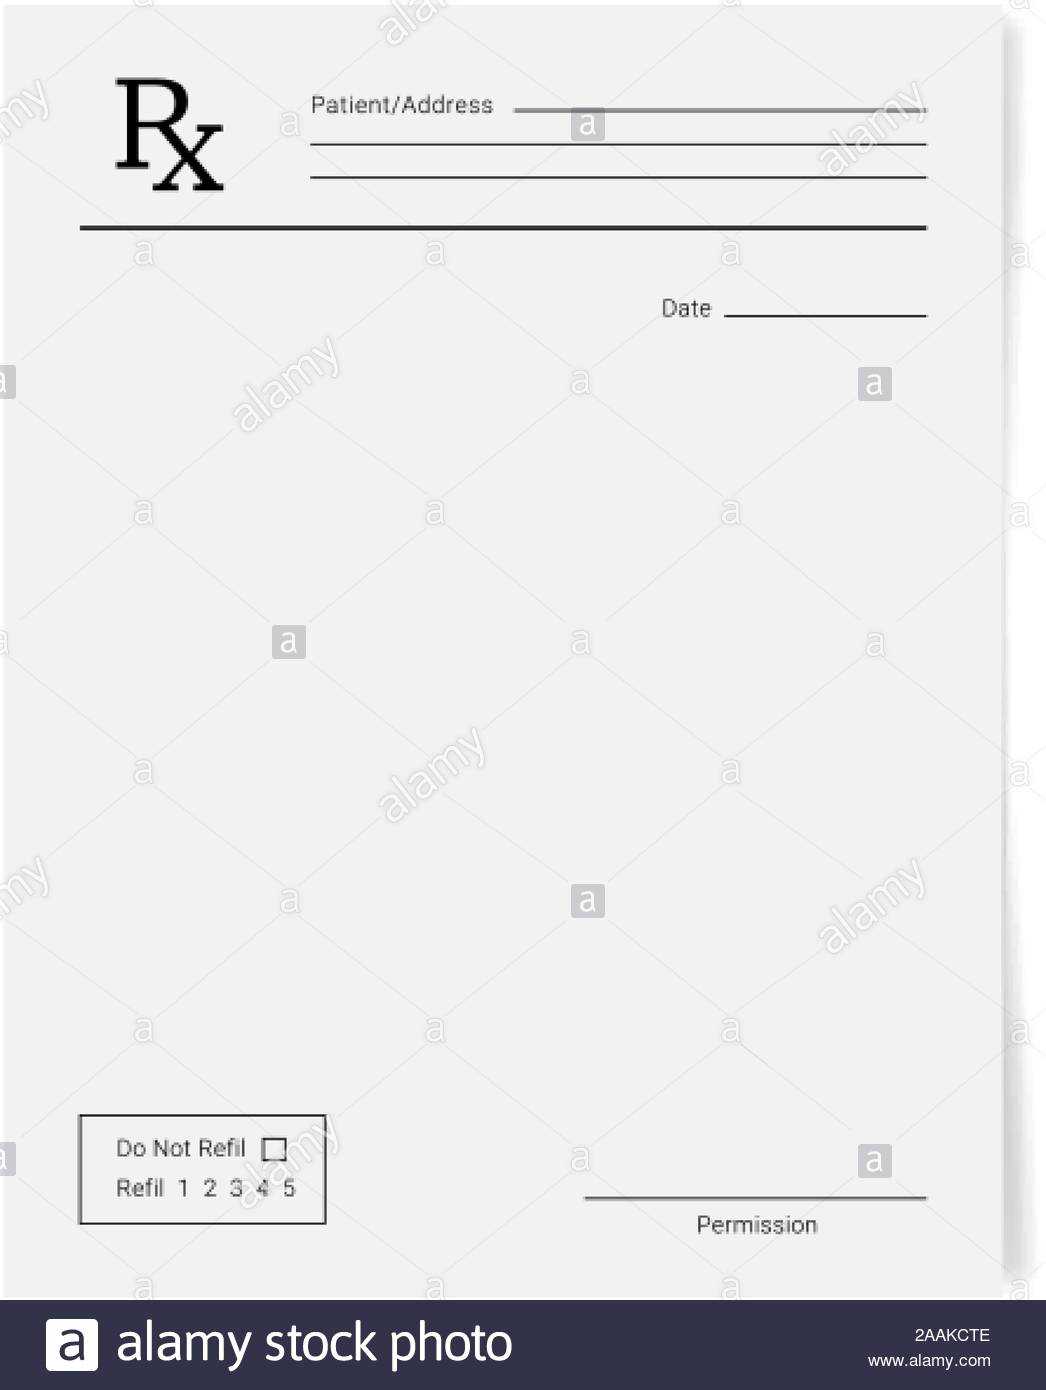 Rx Pad Template. Medical Regular Prescription Form Stock Intended For Blank Prescription Pad Template